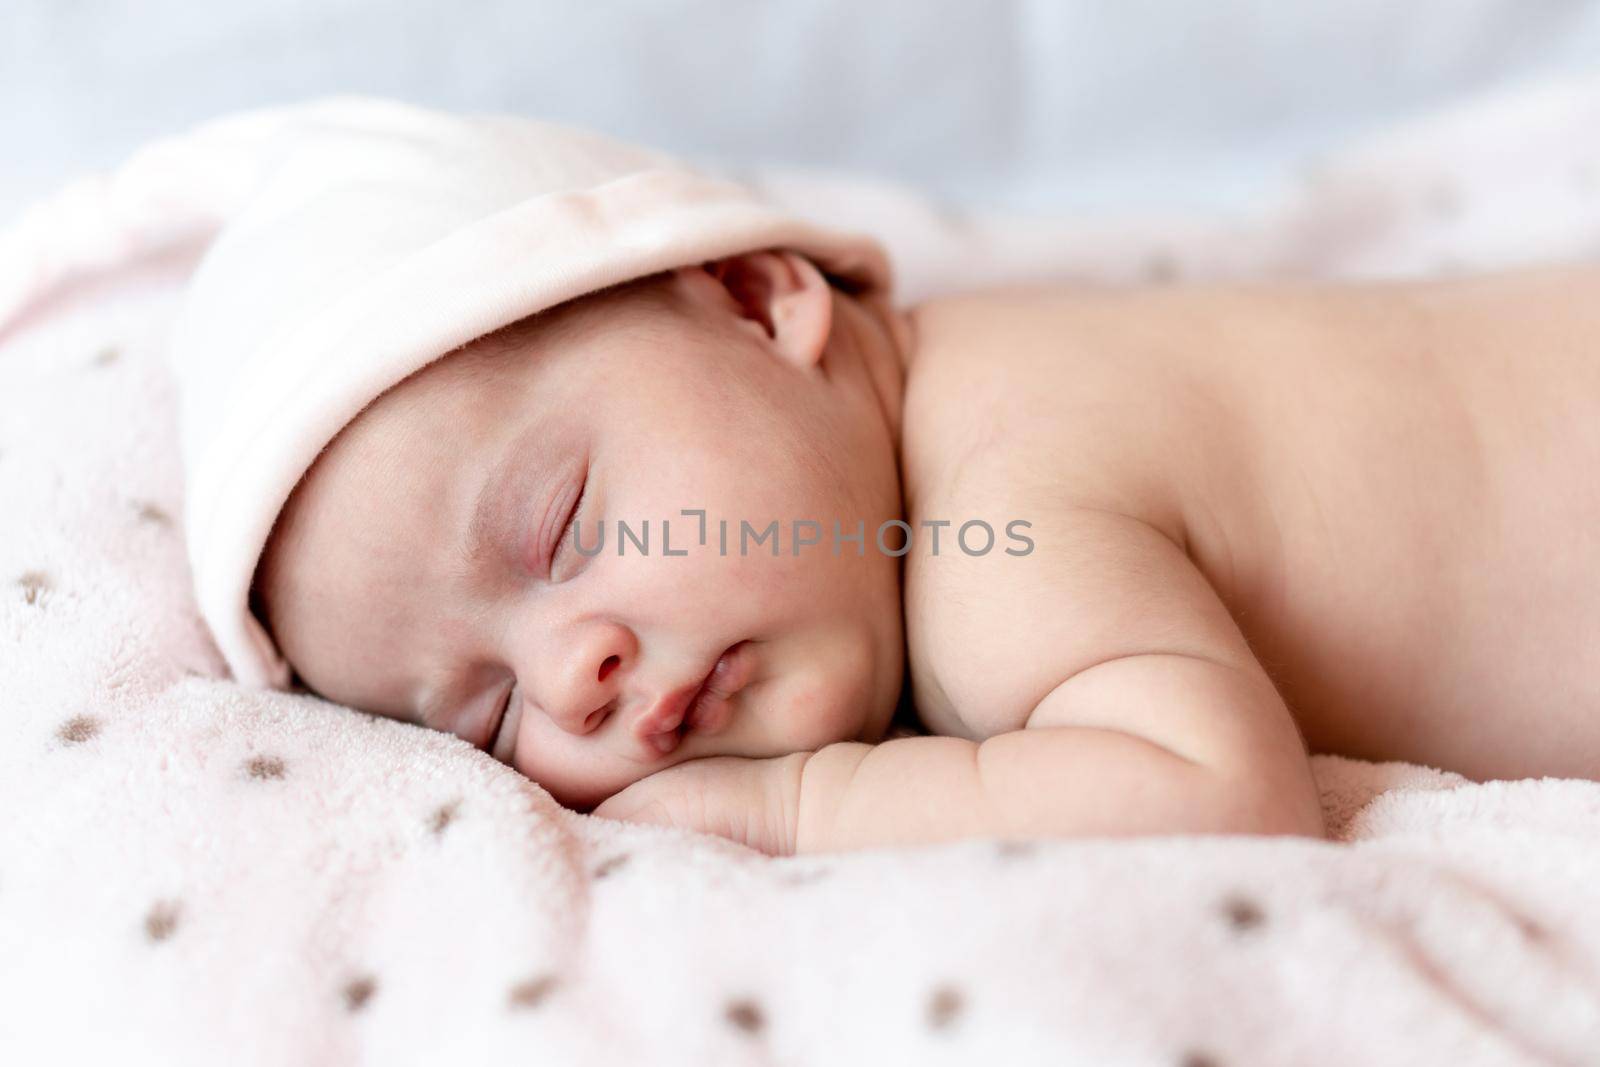 Childhood, care, motherhood, health, medicine, pediatrics concepts - Close up Little peace calm naked infant newborn baby girl in pink hat sleeps resting take deep nap laying on tummy on soft bed